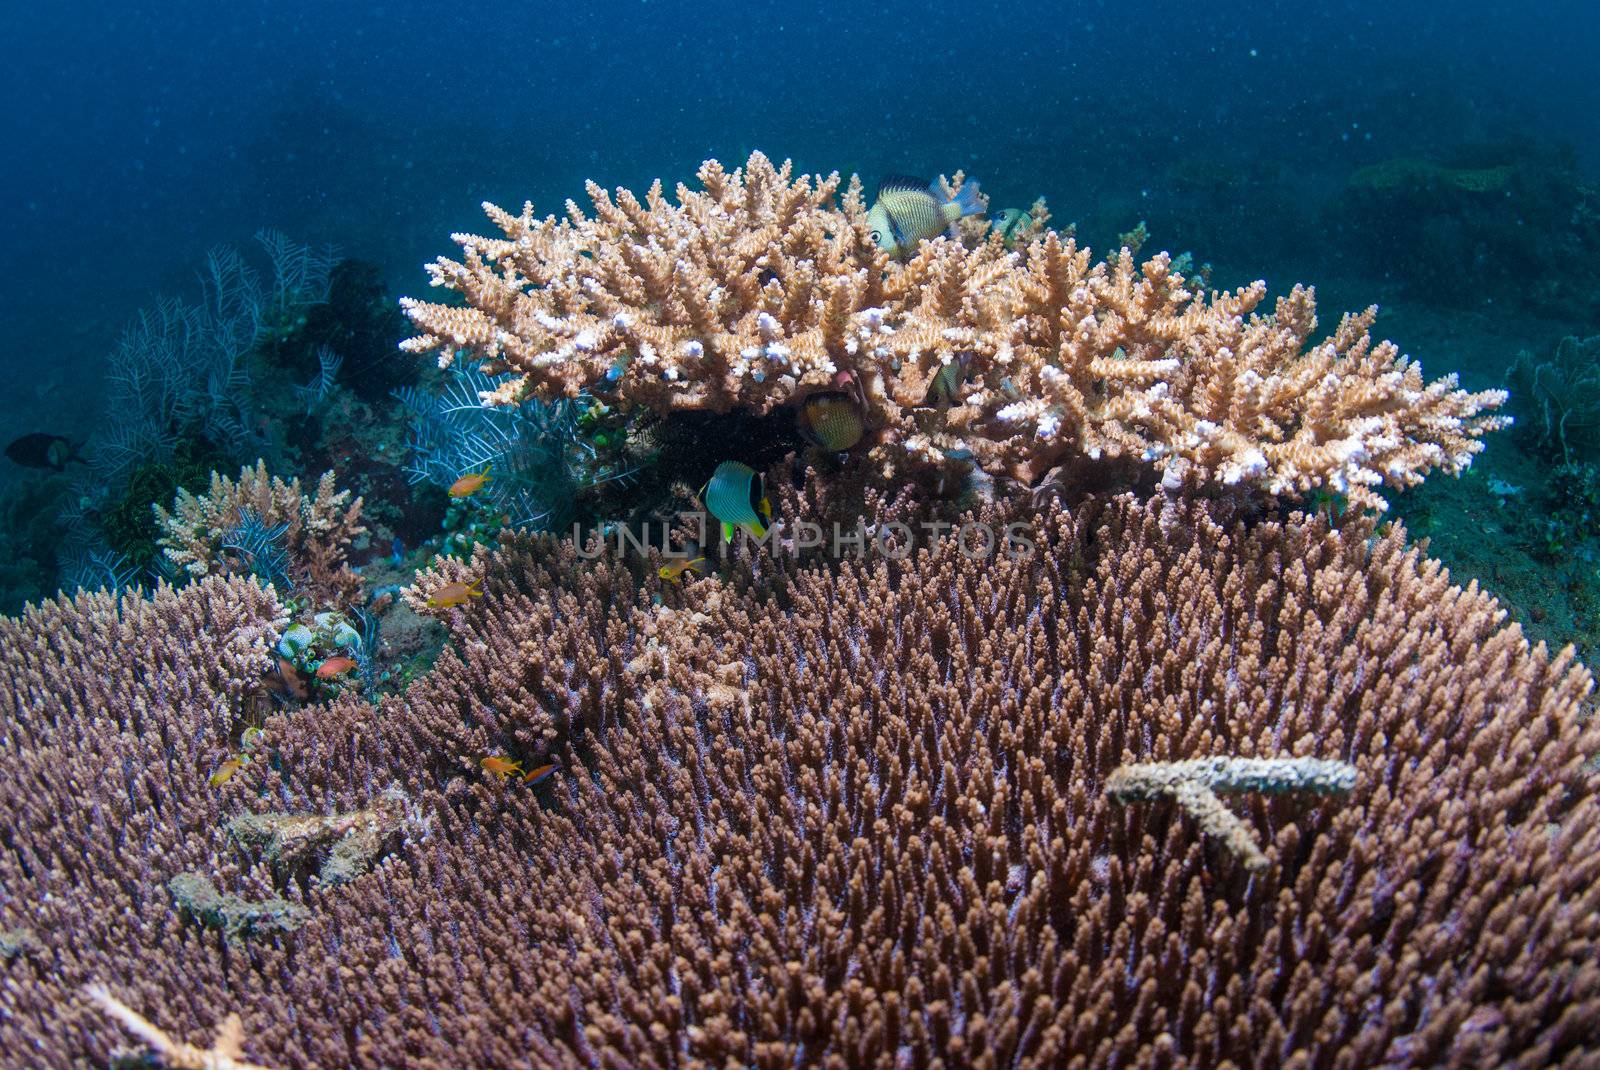 Large Acropora coral colony off Bali, Indonesia